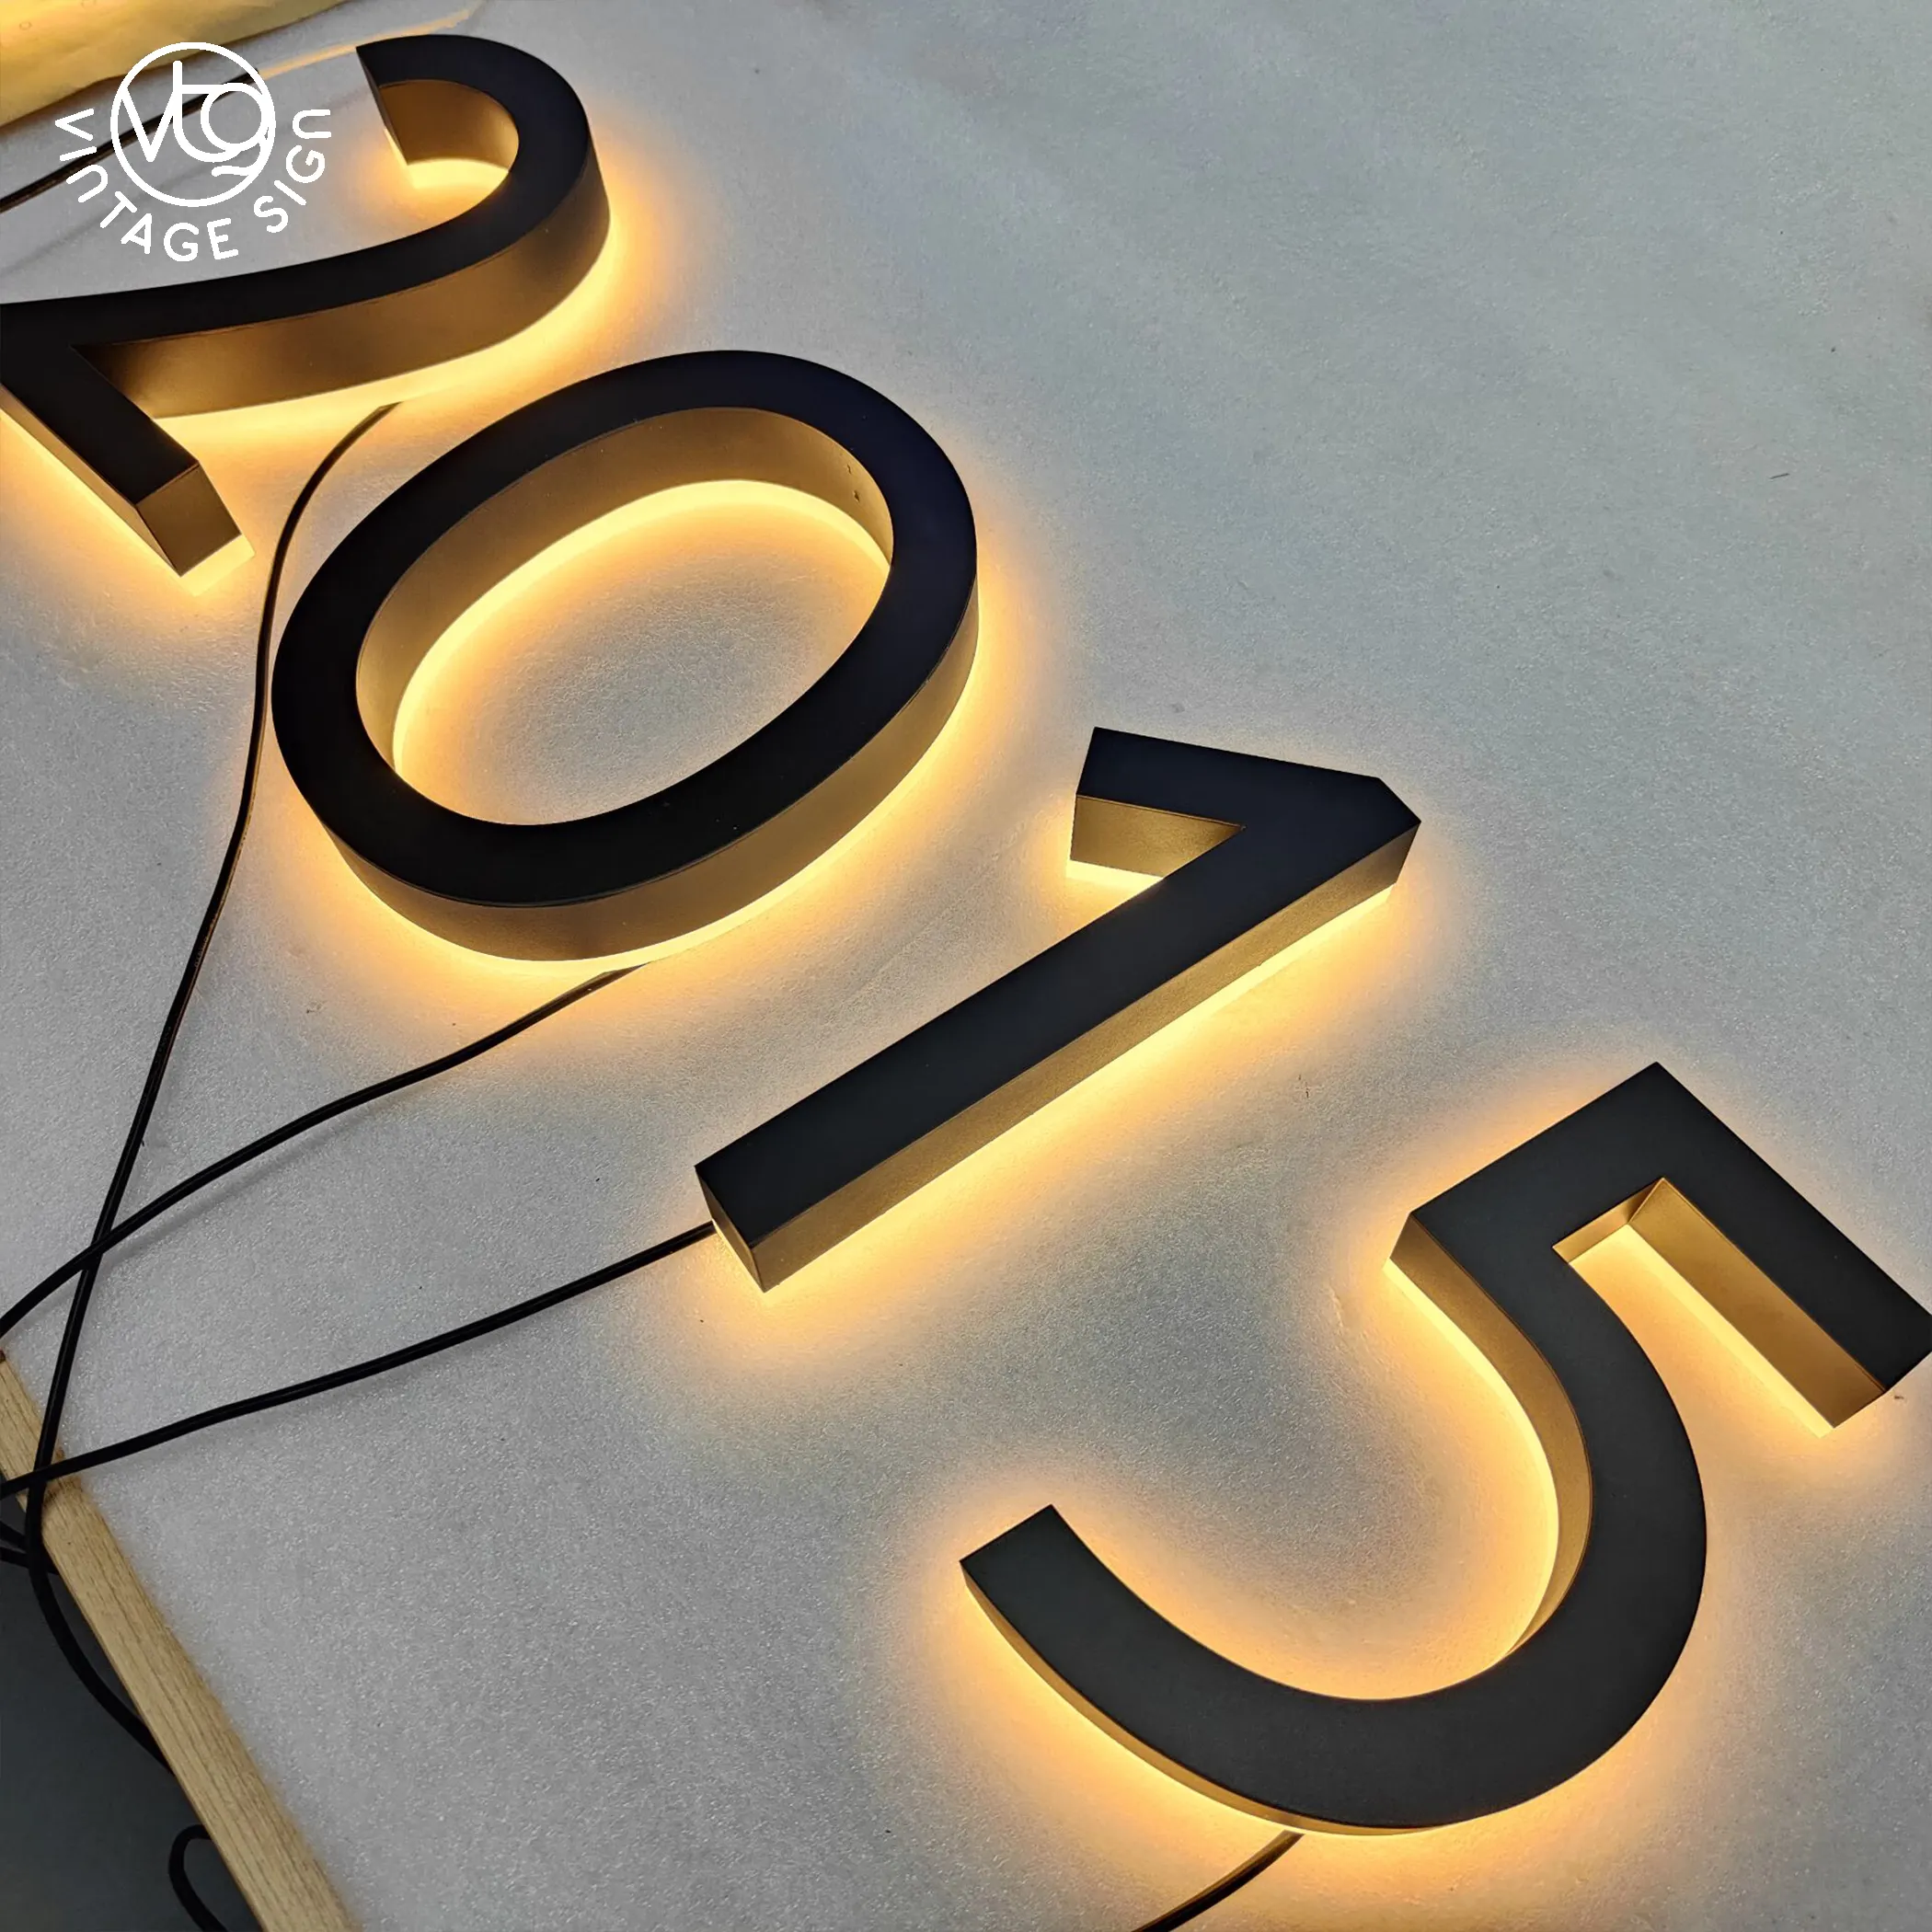 Mirror Gold Sign Back Illuminated 3d Acrylic Outdoor Advertising Backlit Metal Letter Signs With Factory Prices